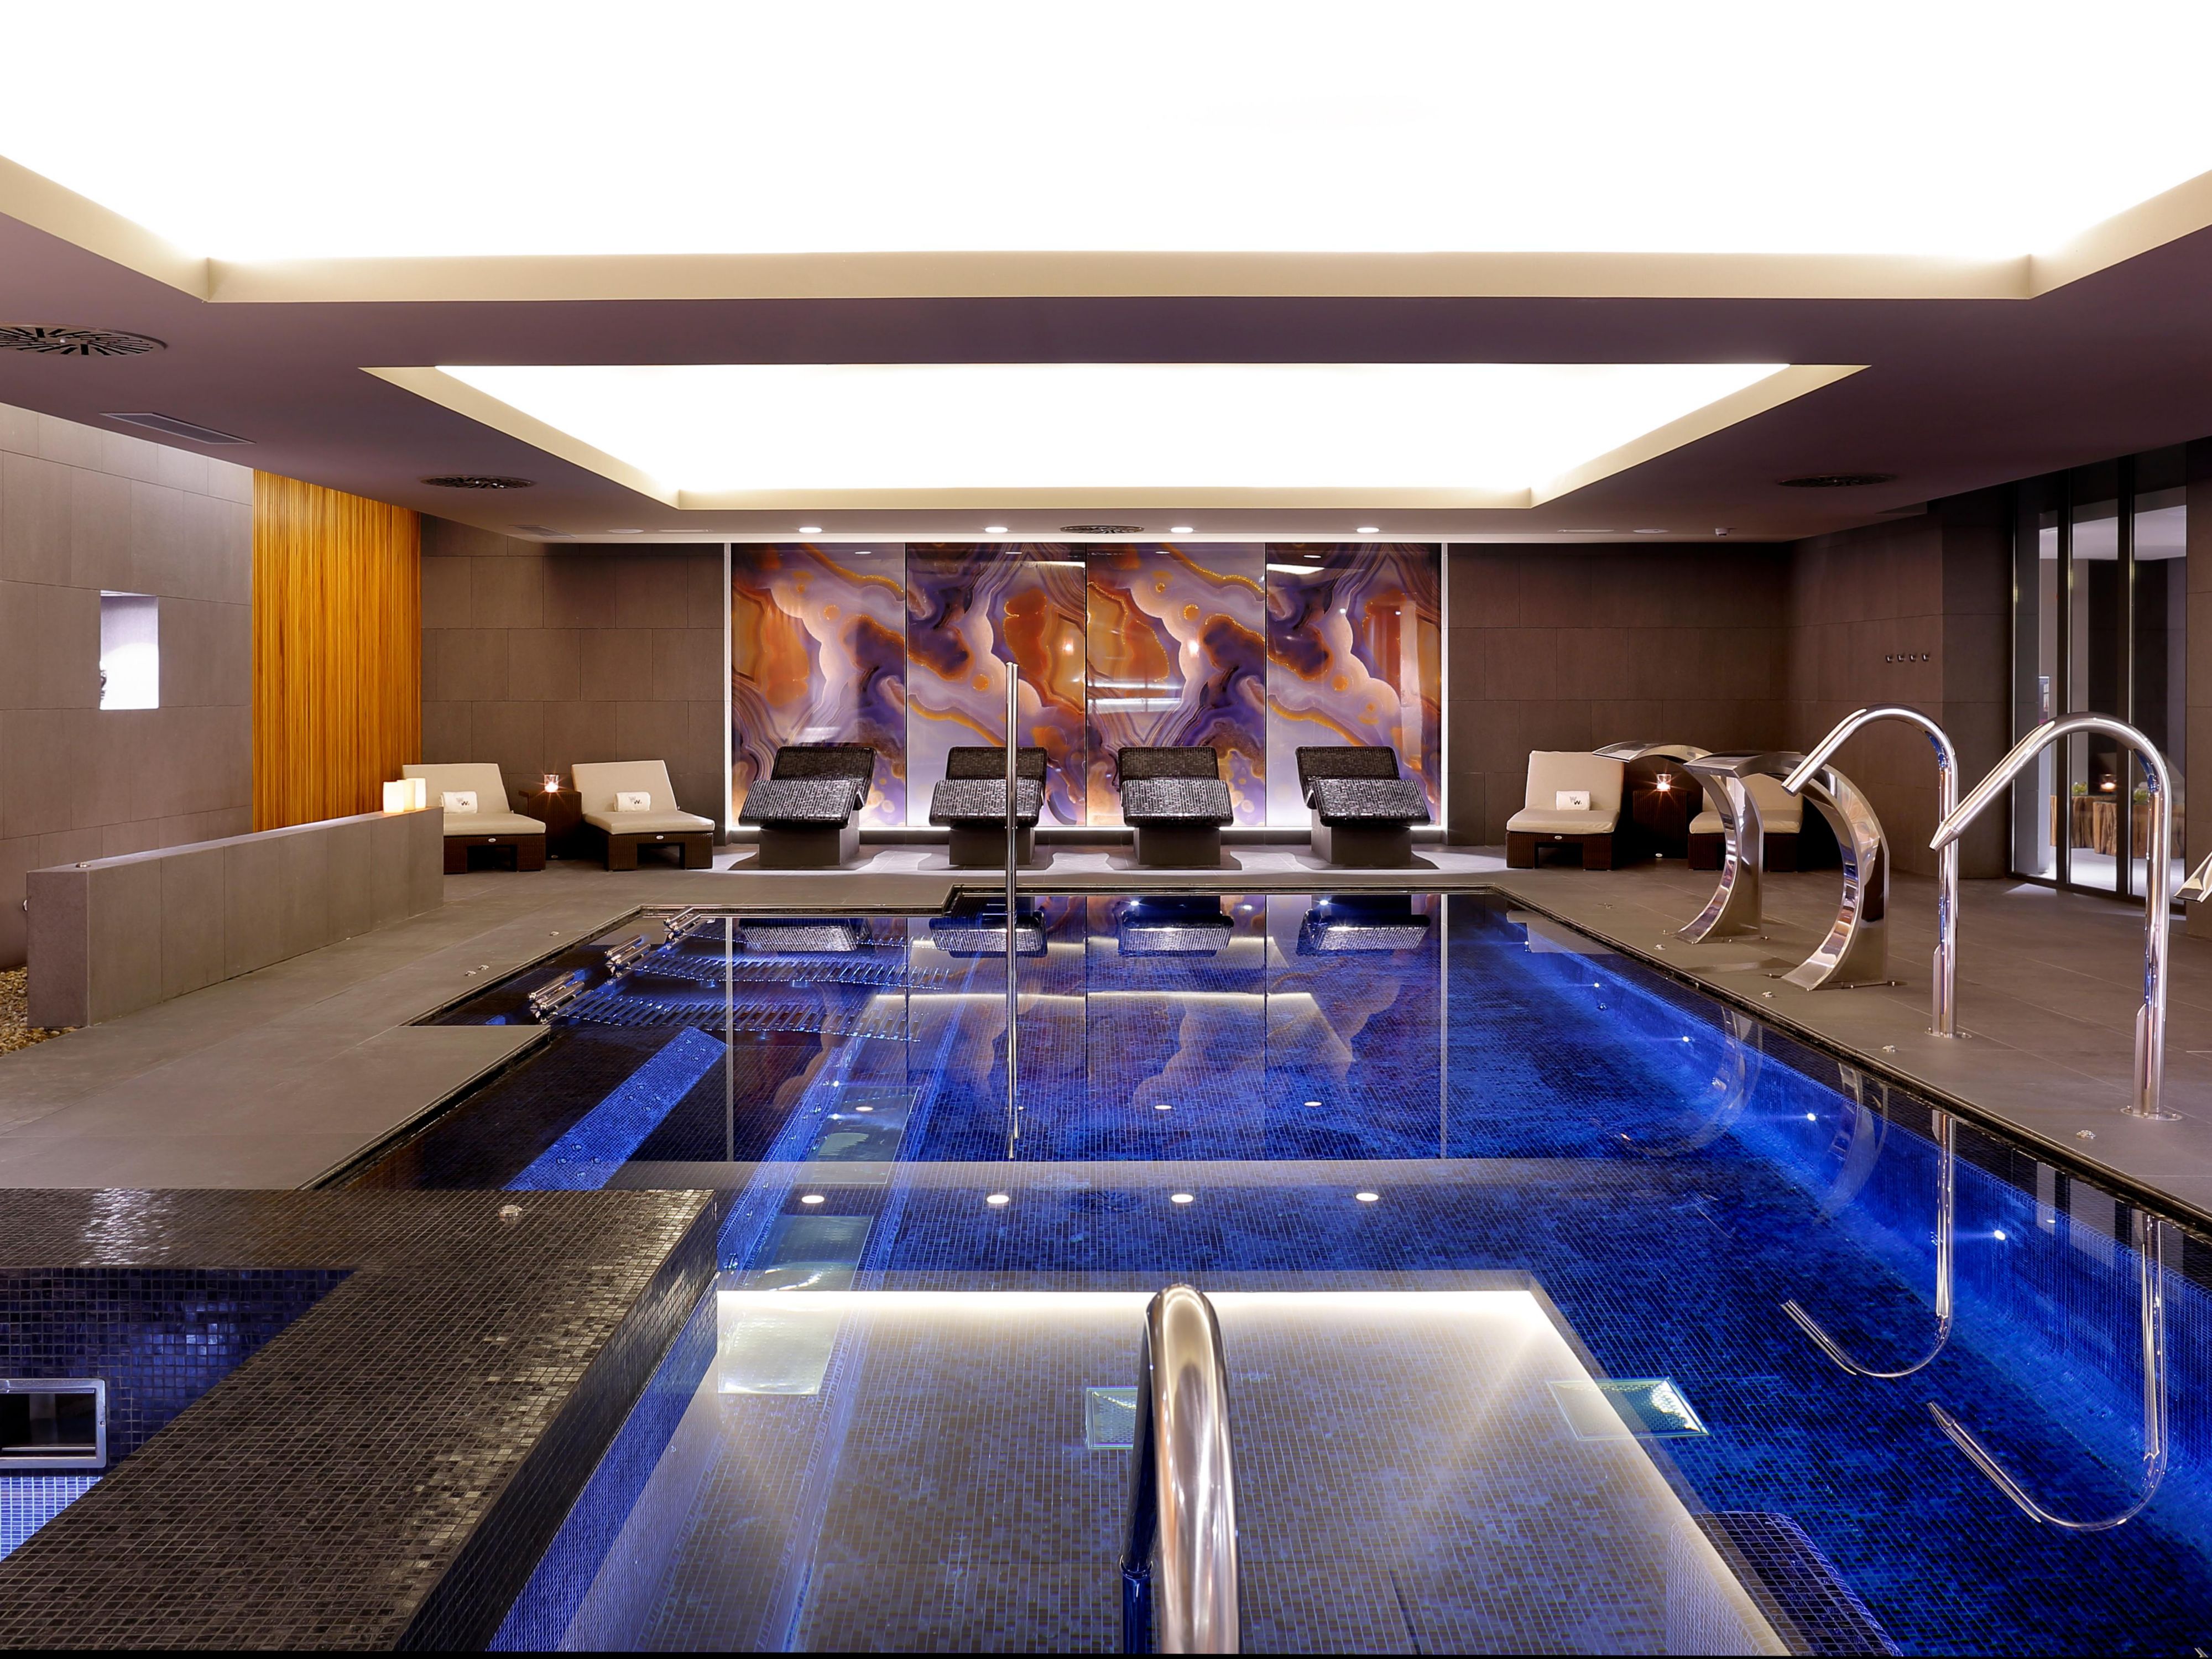 Spa InterContinental package